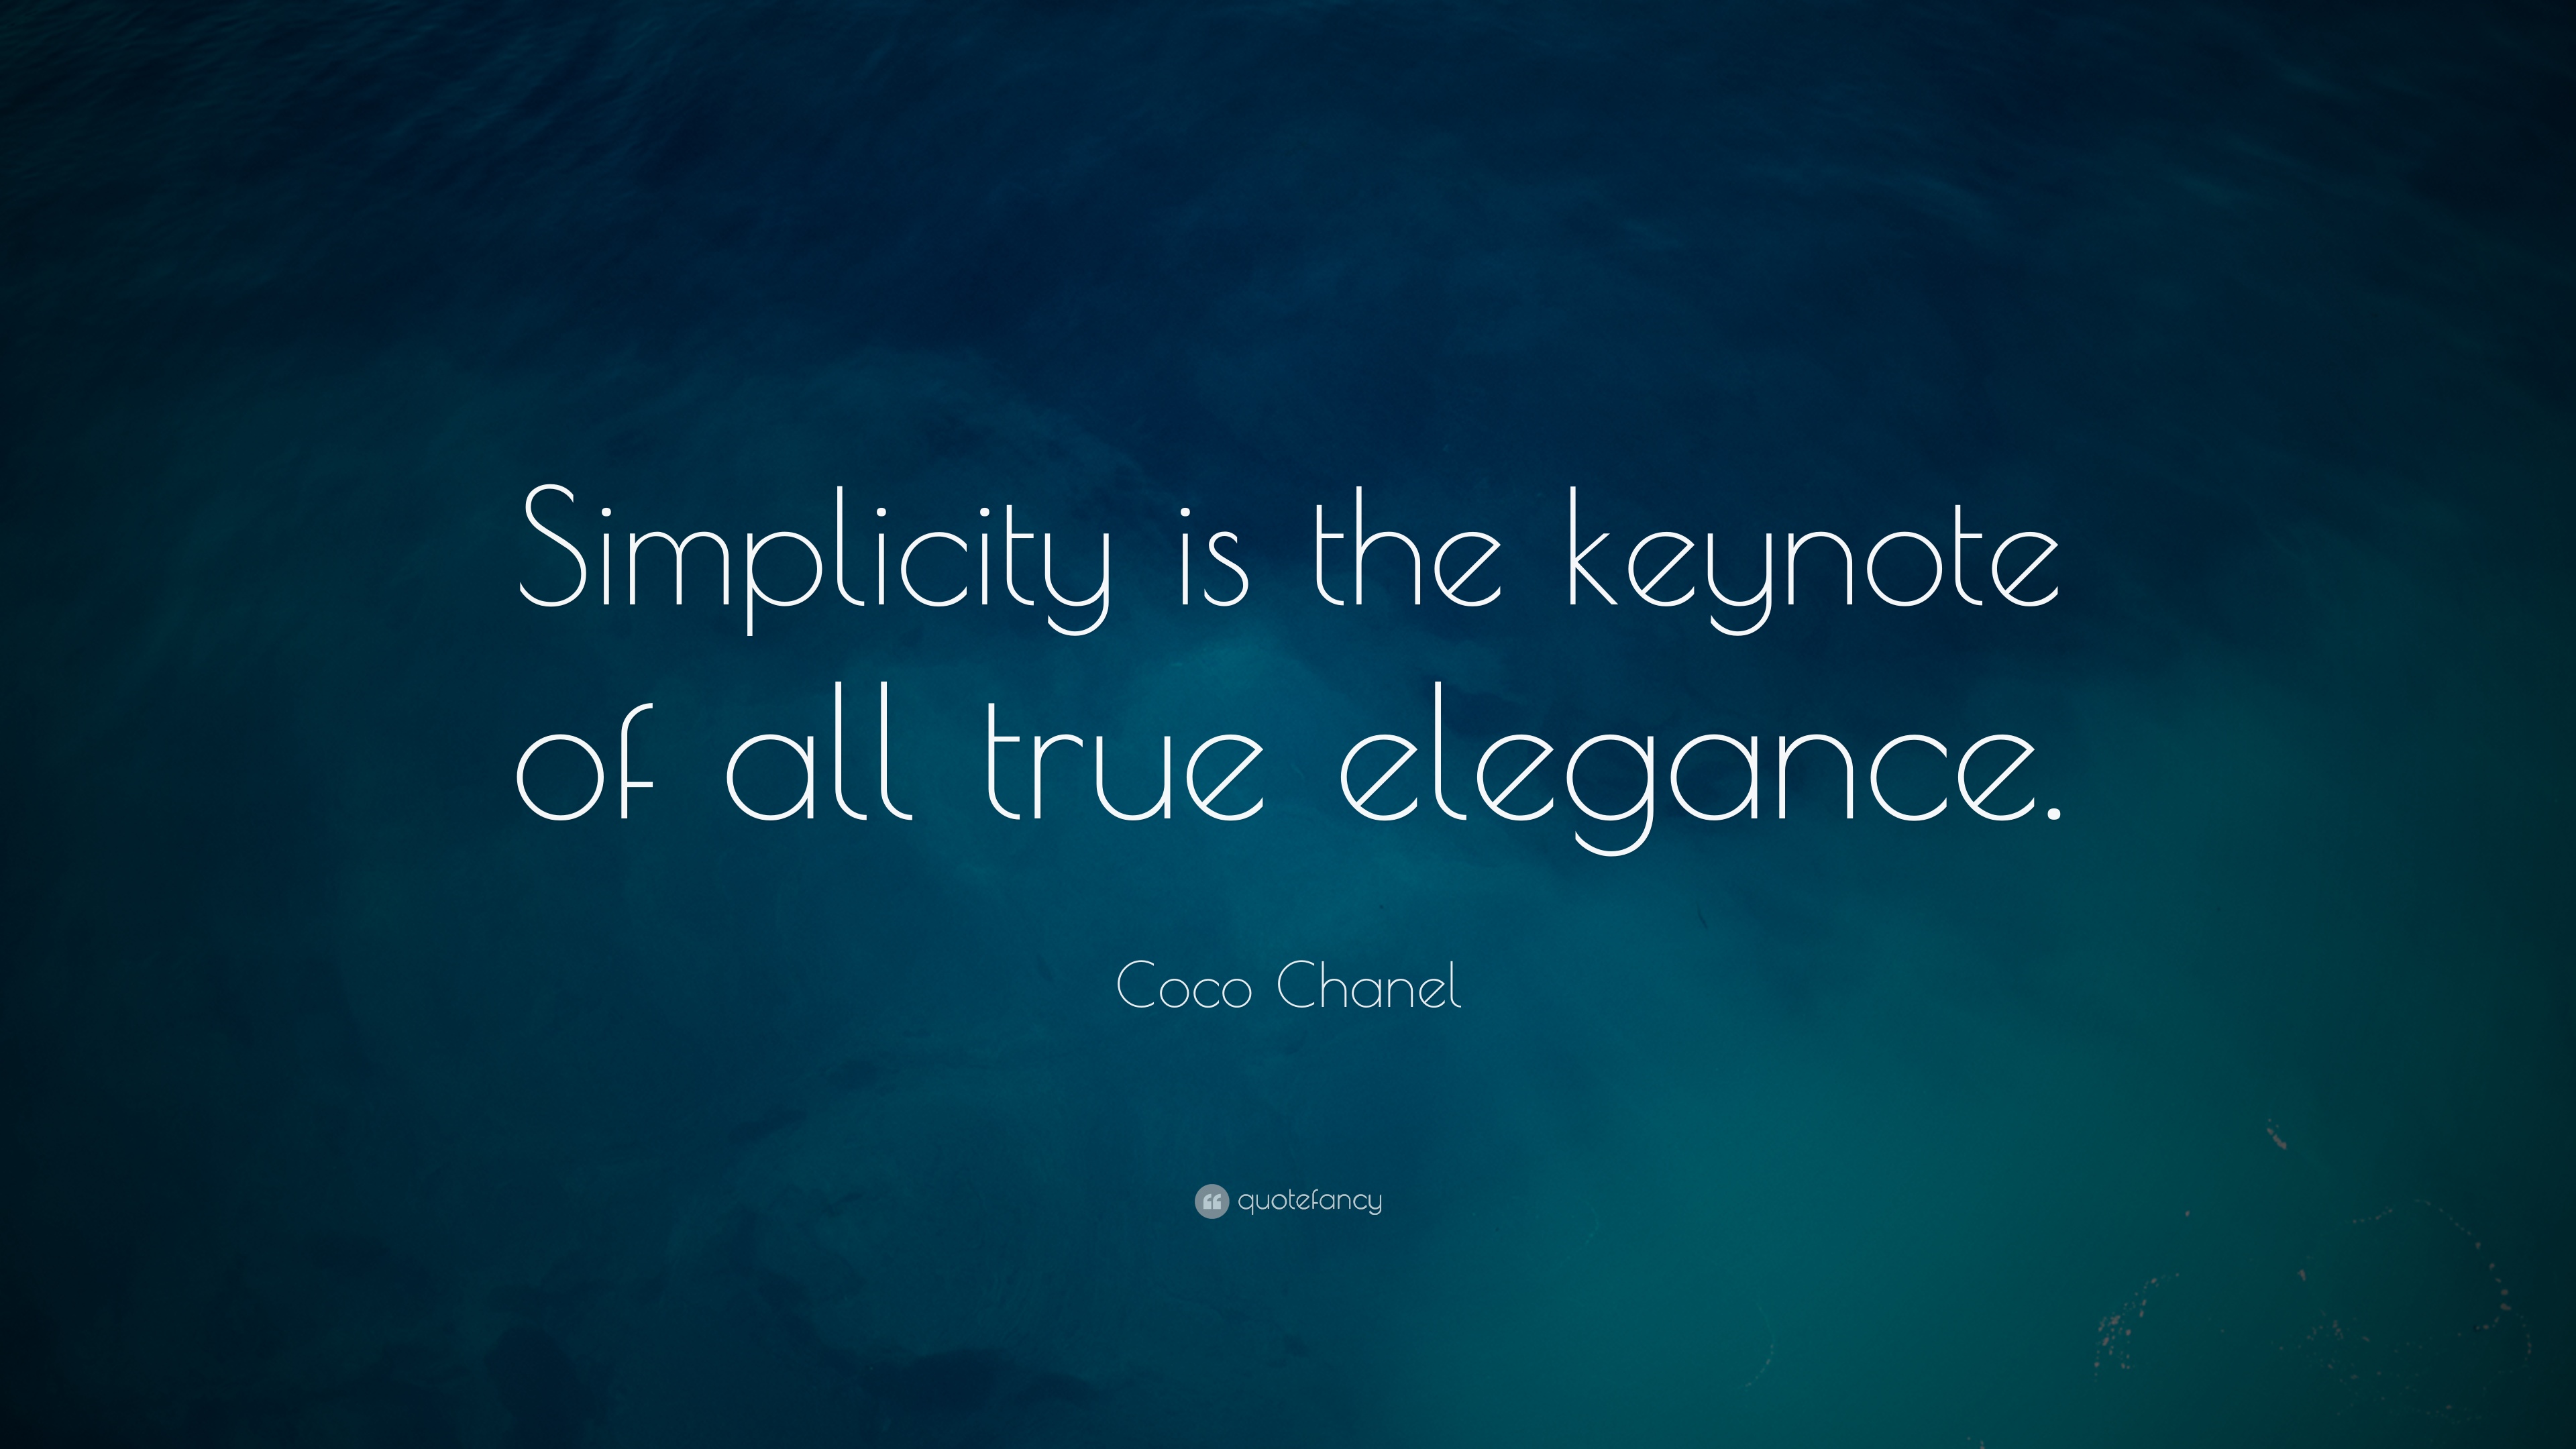 Coco Chanel Quotes (22 wallpapers) - Quotefancy